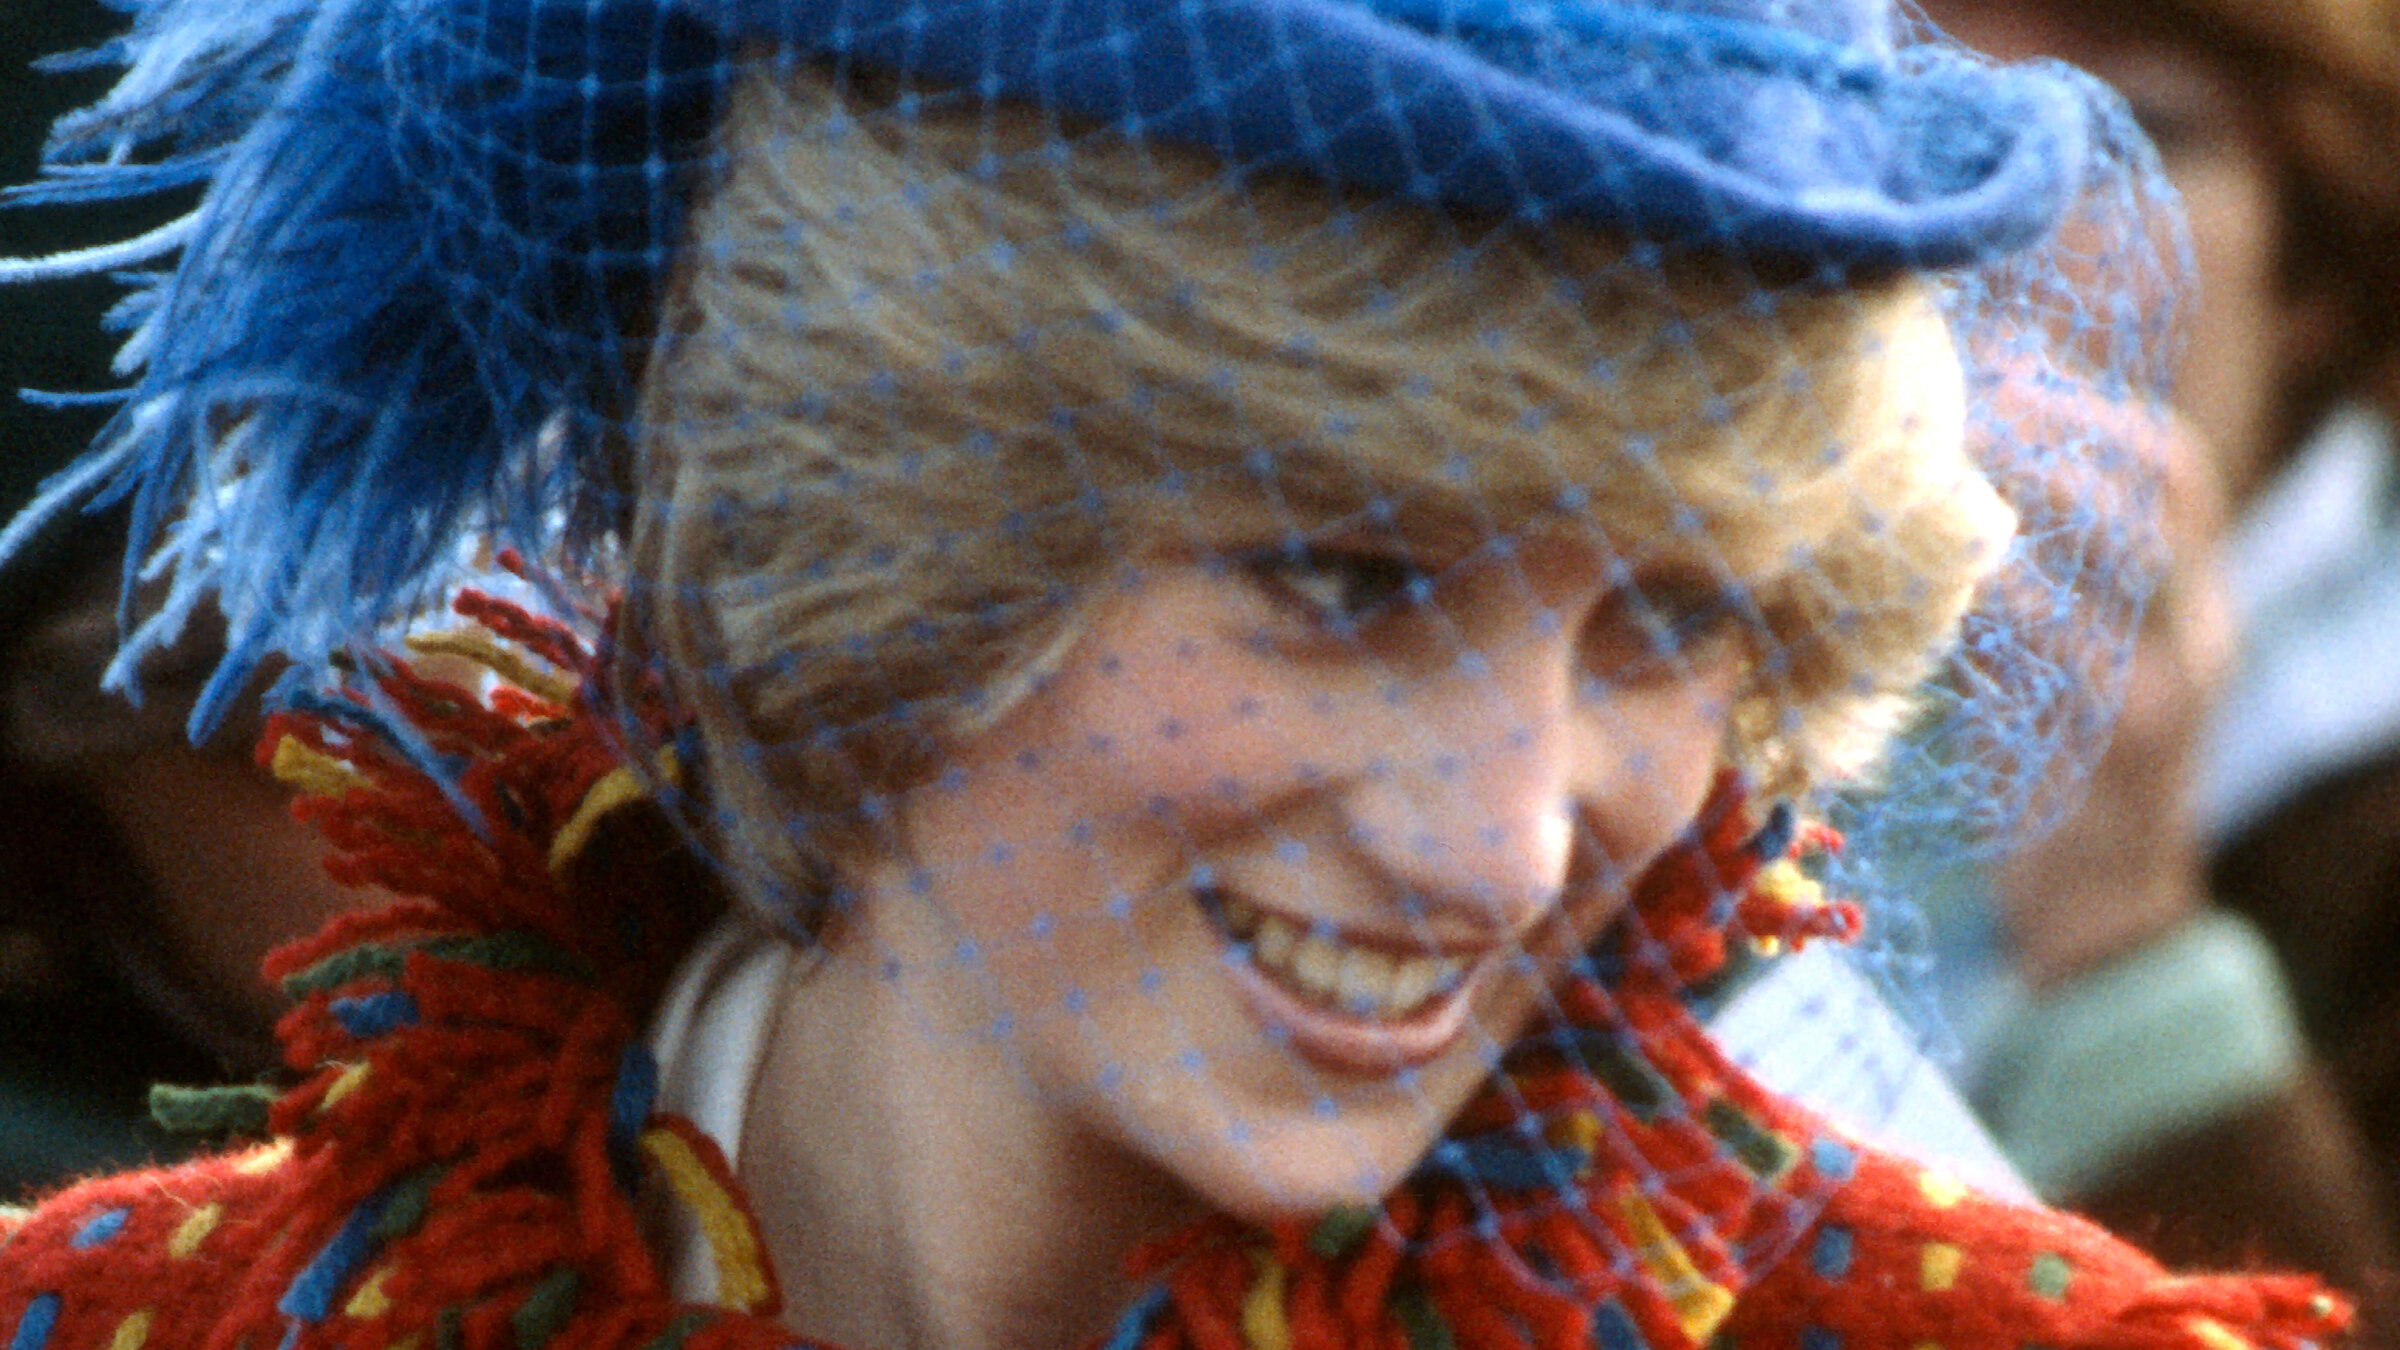 Princess Diana, circa 1982, wearing a red coat designed by Bellville Sassoon and a John Boyd hat.